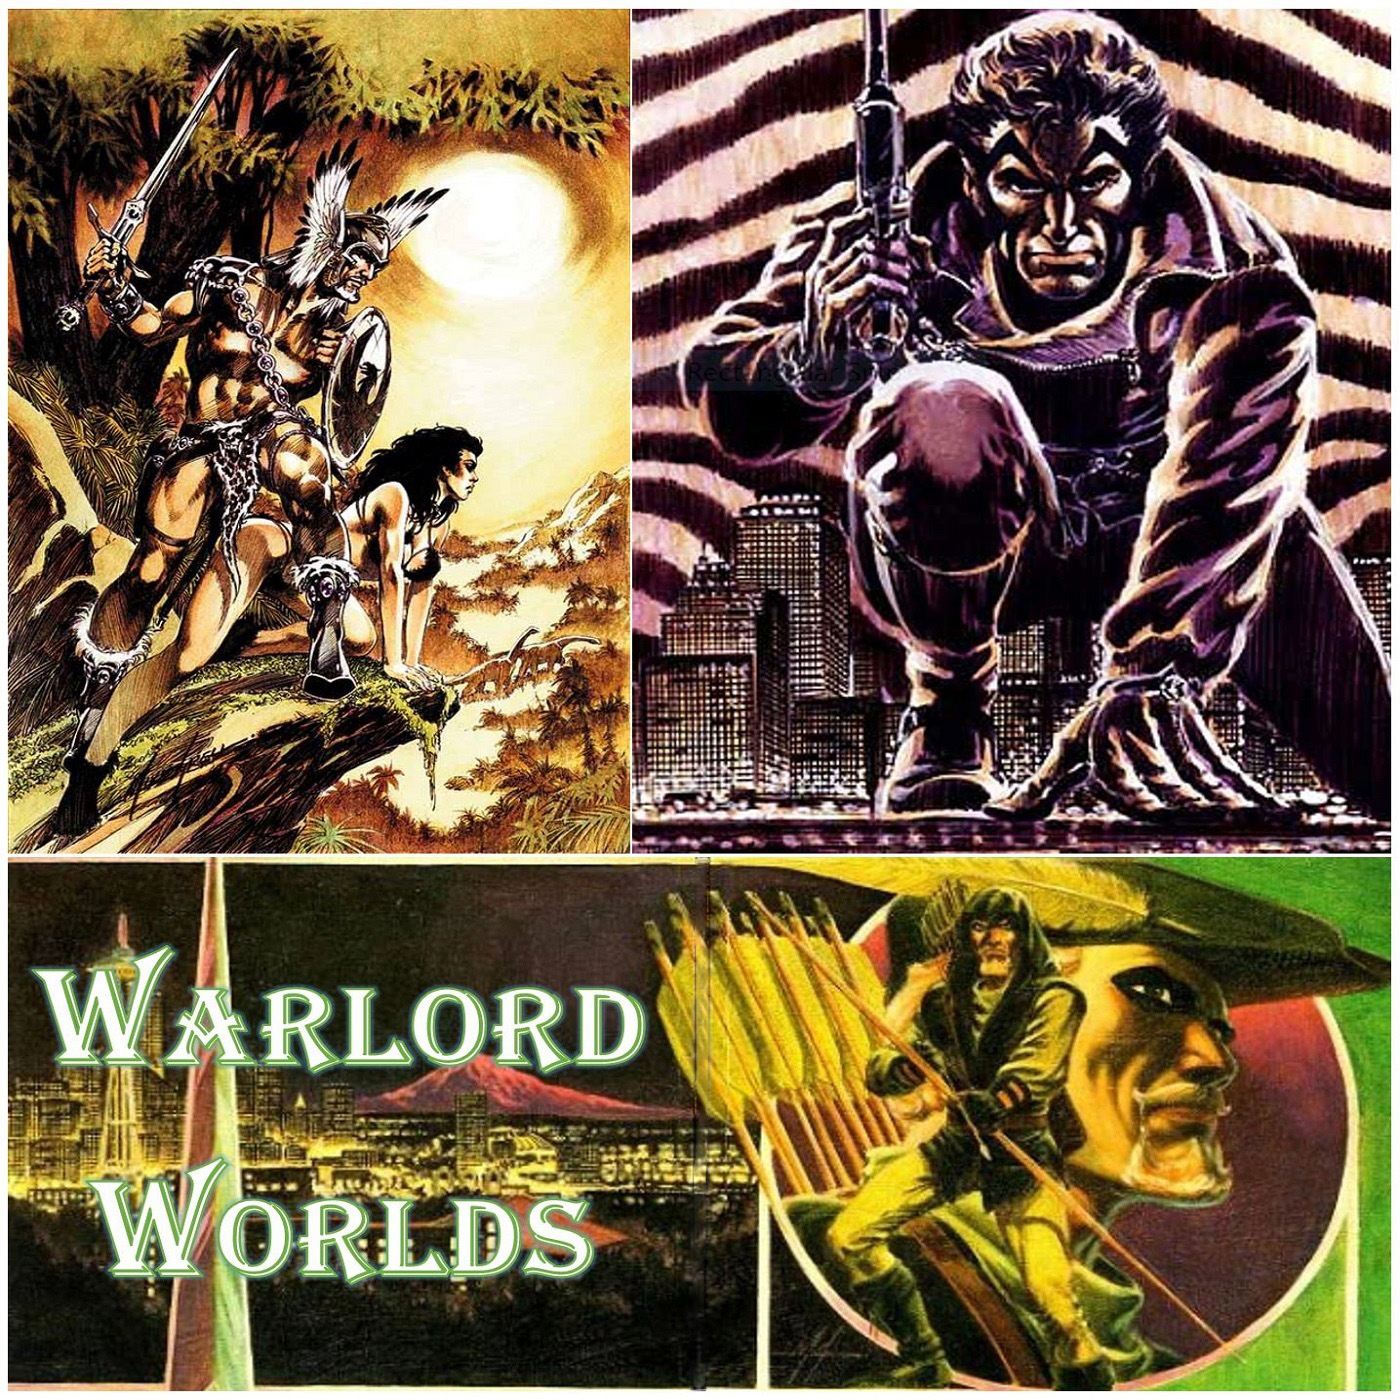 Warlord Worlds Episode 16